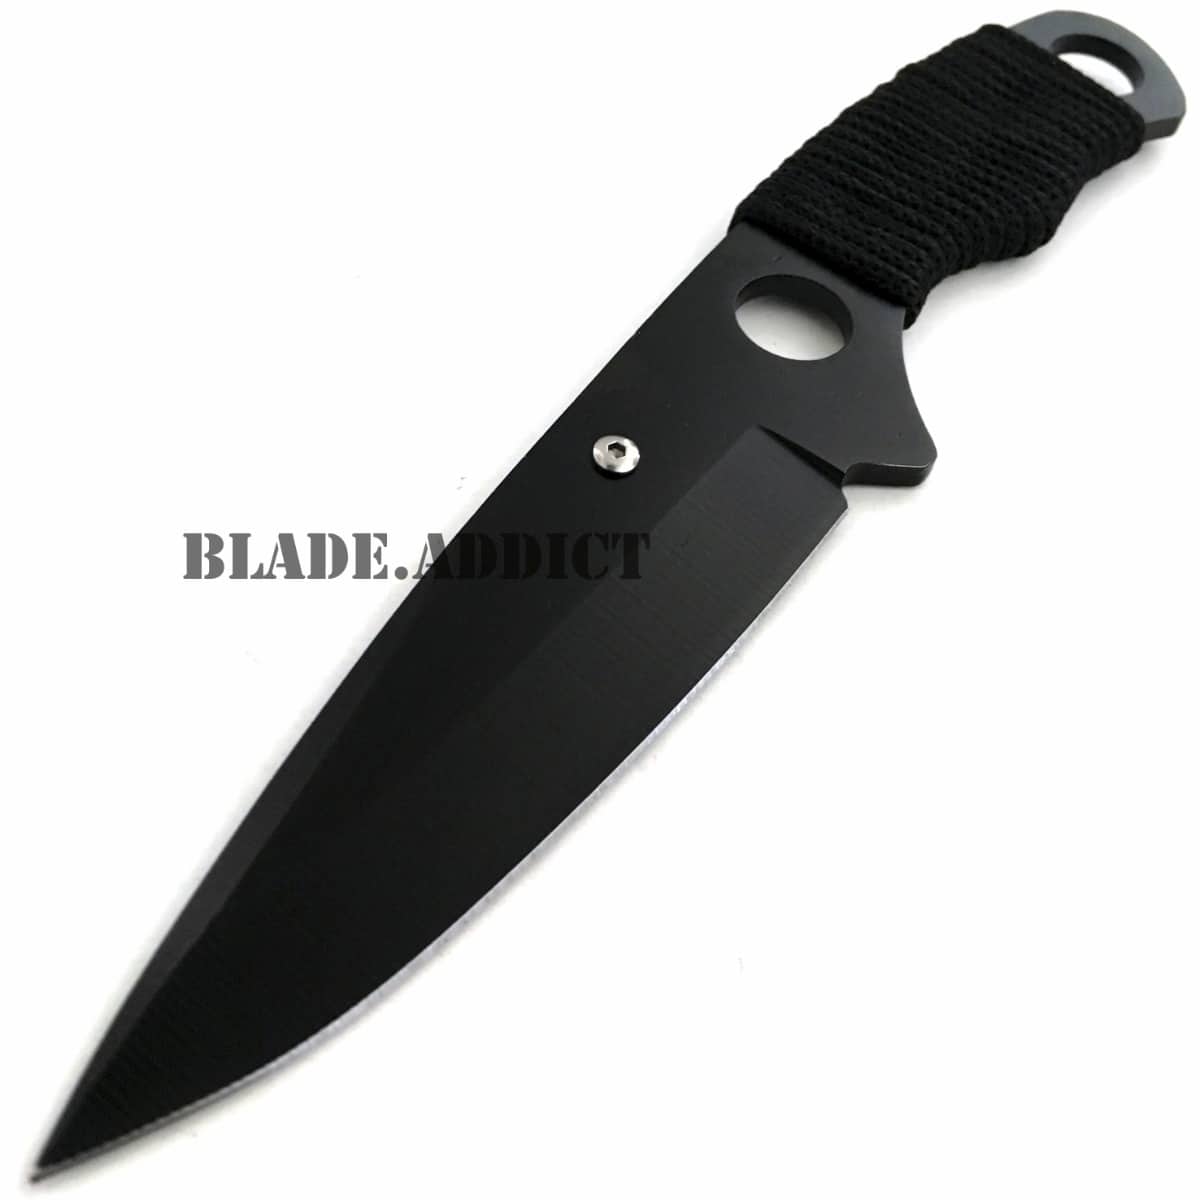 7" TACTICAL MILITARY COMBAT FIXED BLADE NECK KNIFE DAGGER BOOT POCKET CAMPING